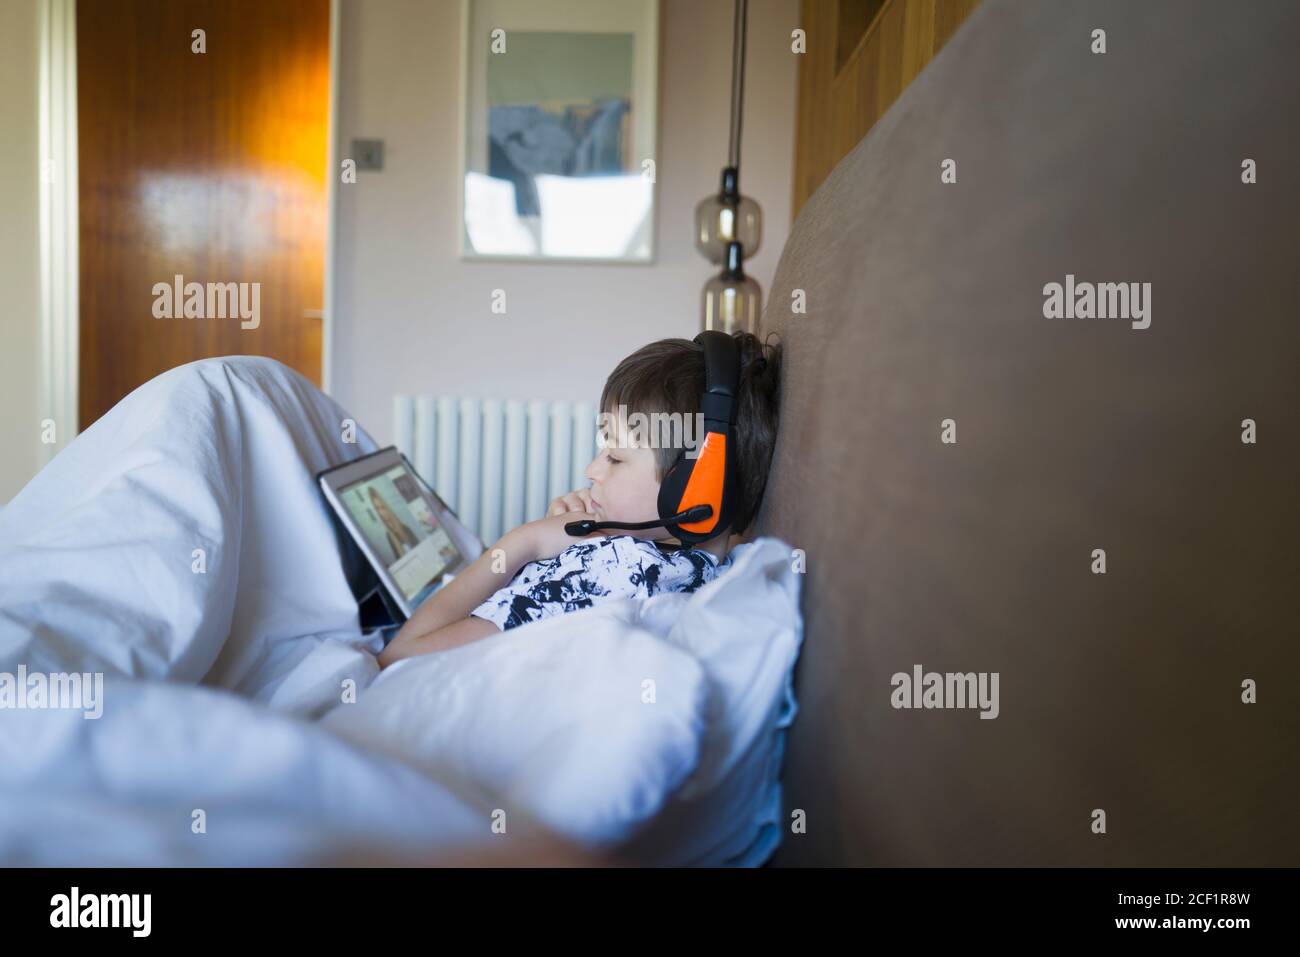 Boy with headphones e-learning with digital tablet in bed Stock Photo